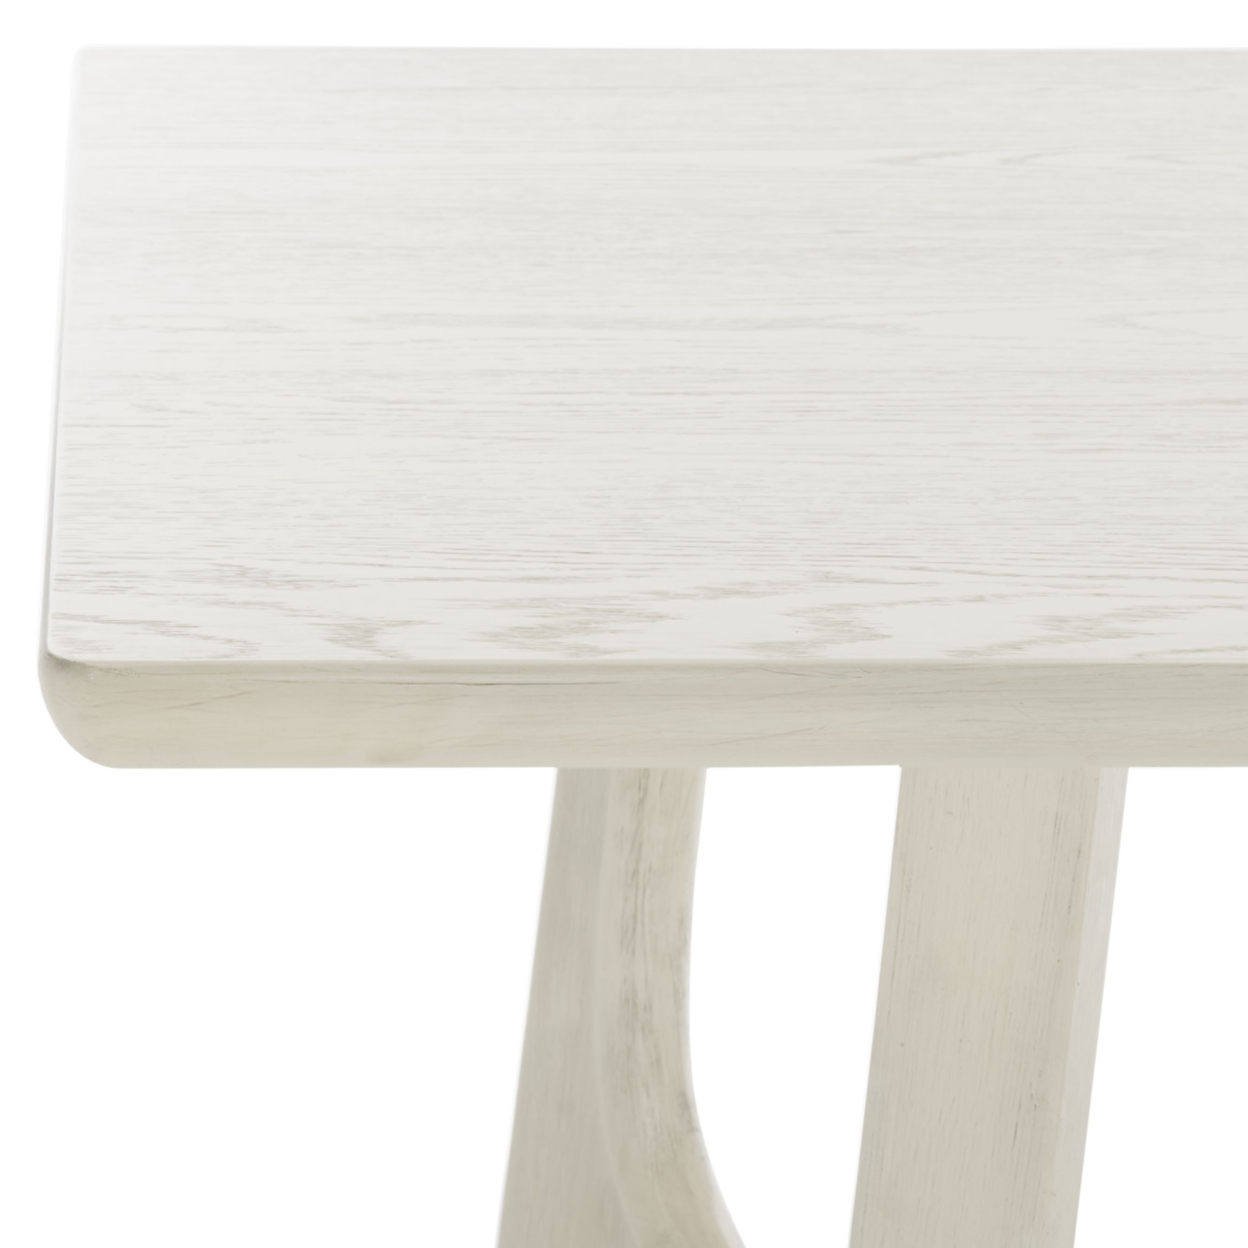 SAFAVIEH COUTURE Adelee Wood Rectangle Dn Table White Washed